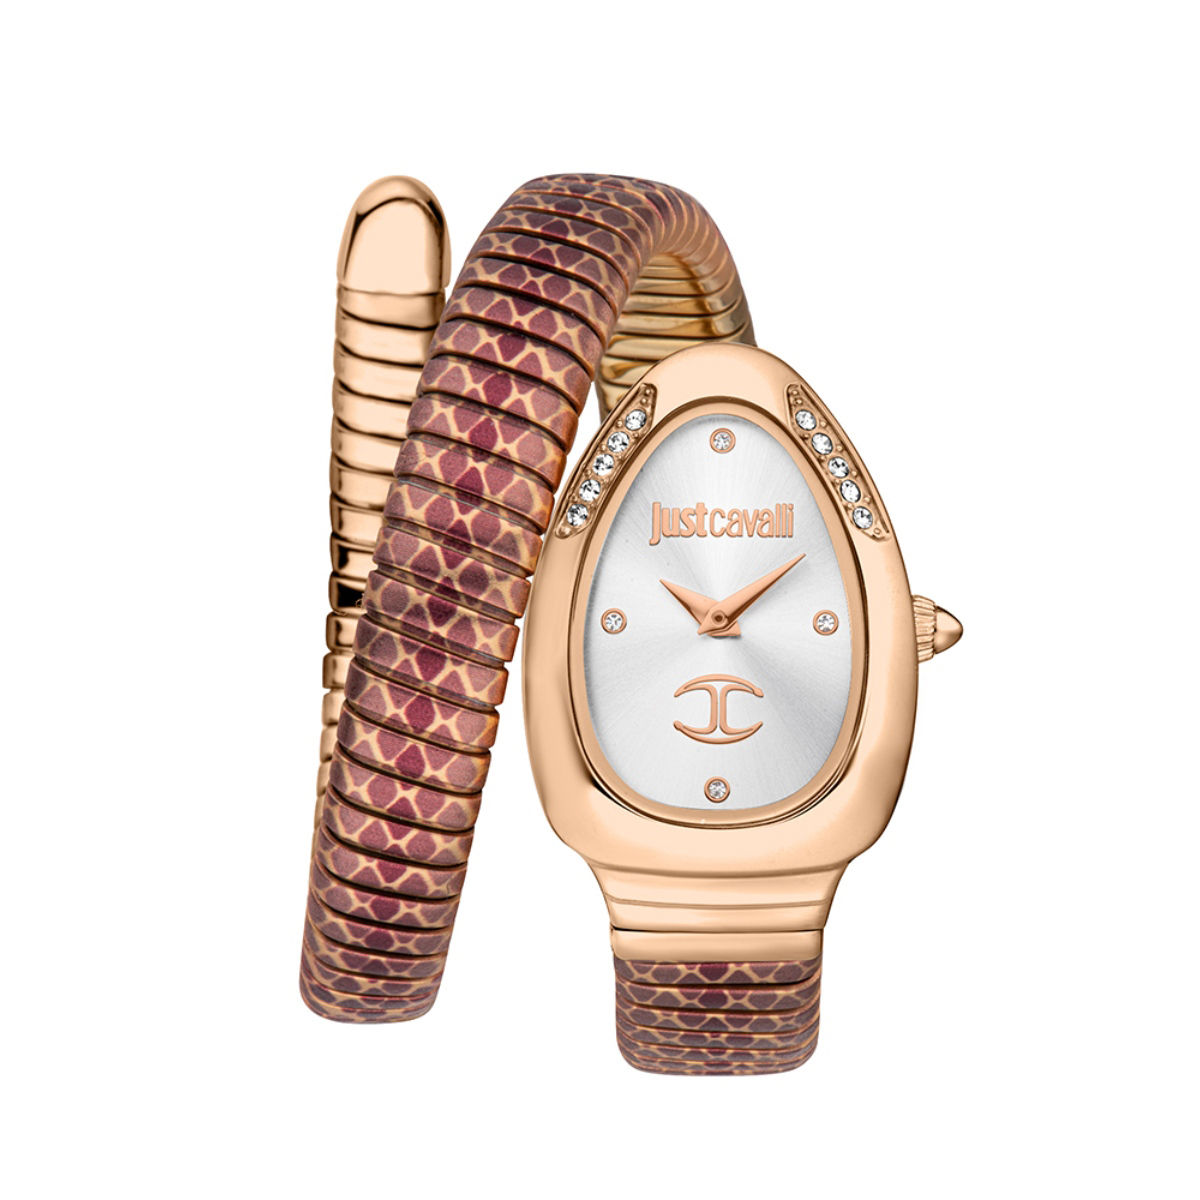 Buy Aglance Rose Gold Women's Watch Embrace The Latest Trend with Stylish  Snake Design Metal Strap Dial Bracelet (Gold) at Amazon.in